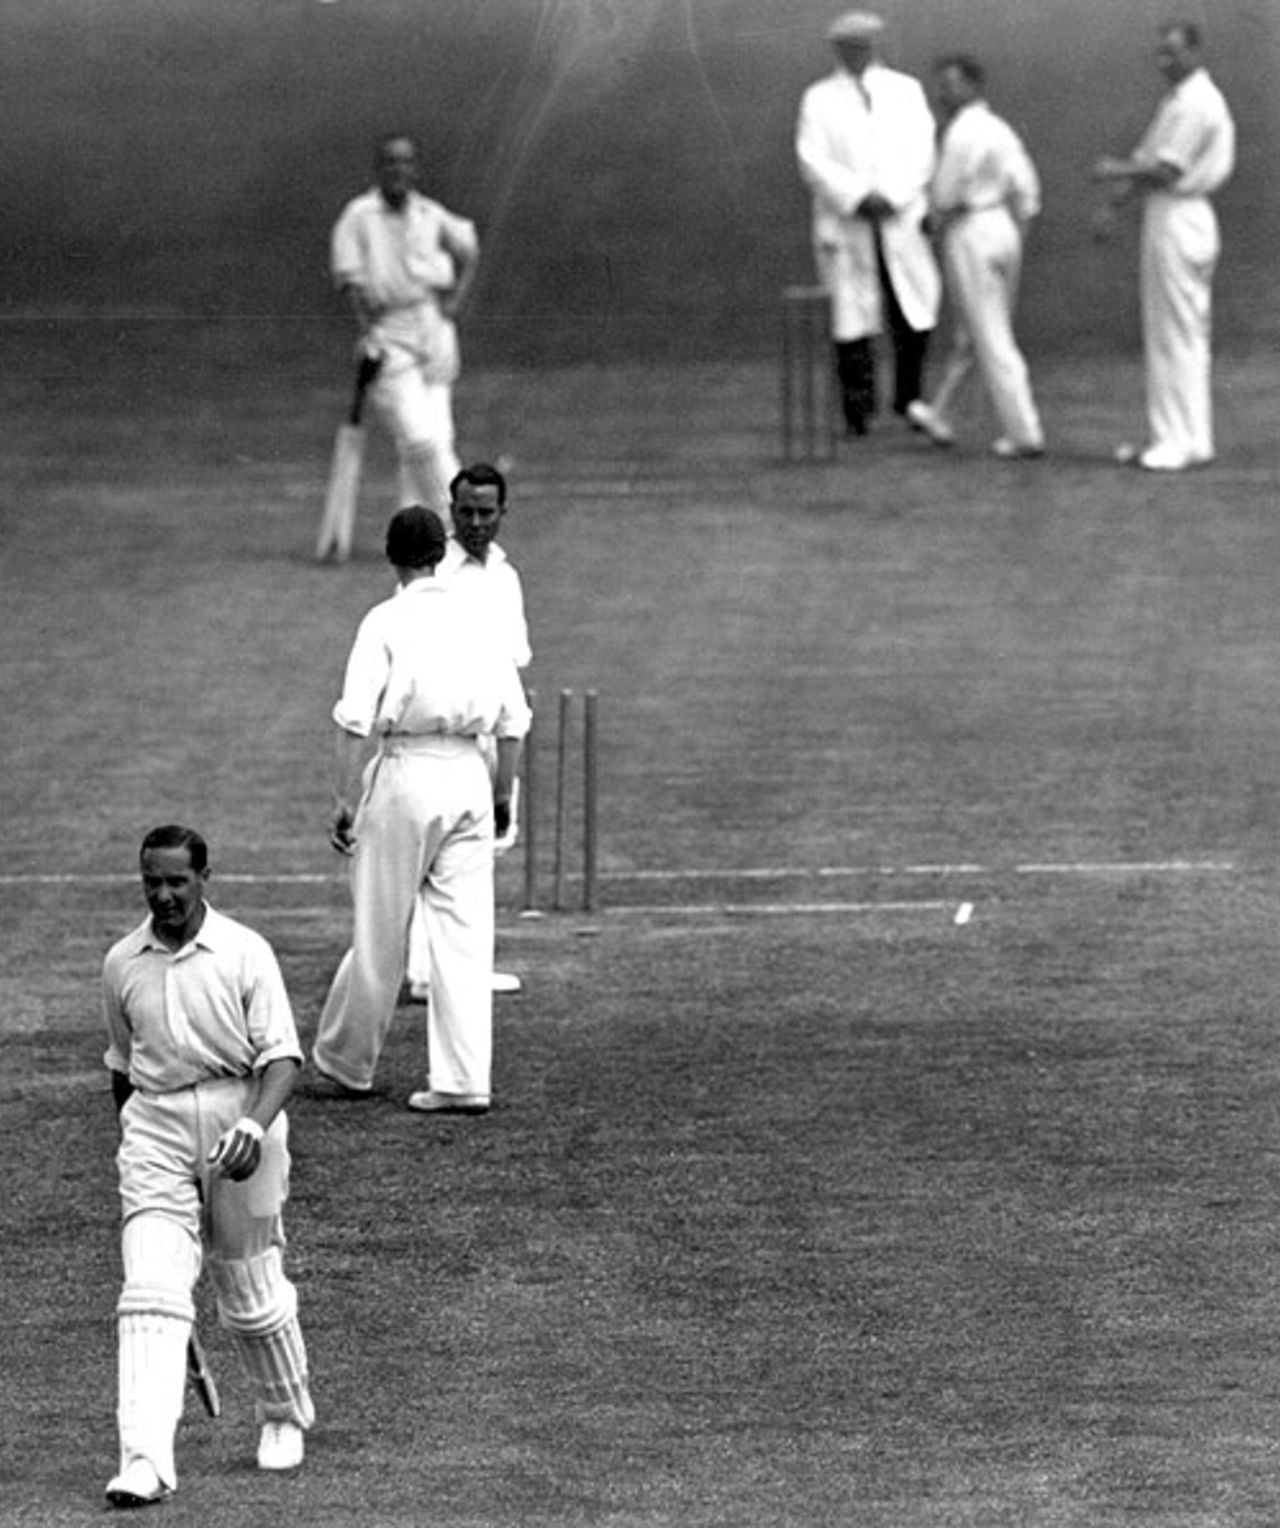 Herbert Sutcliffe leaves after being dismissed for 313, Essex v Yorkshire, County Championship, 2nd day, June 16, 1932